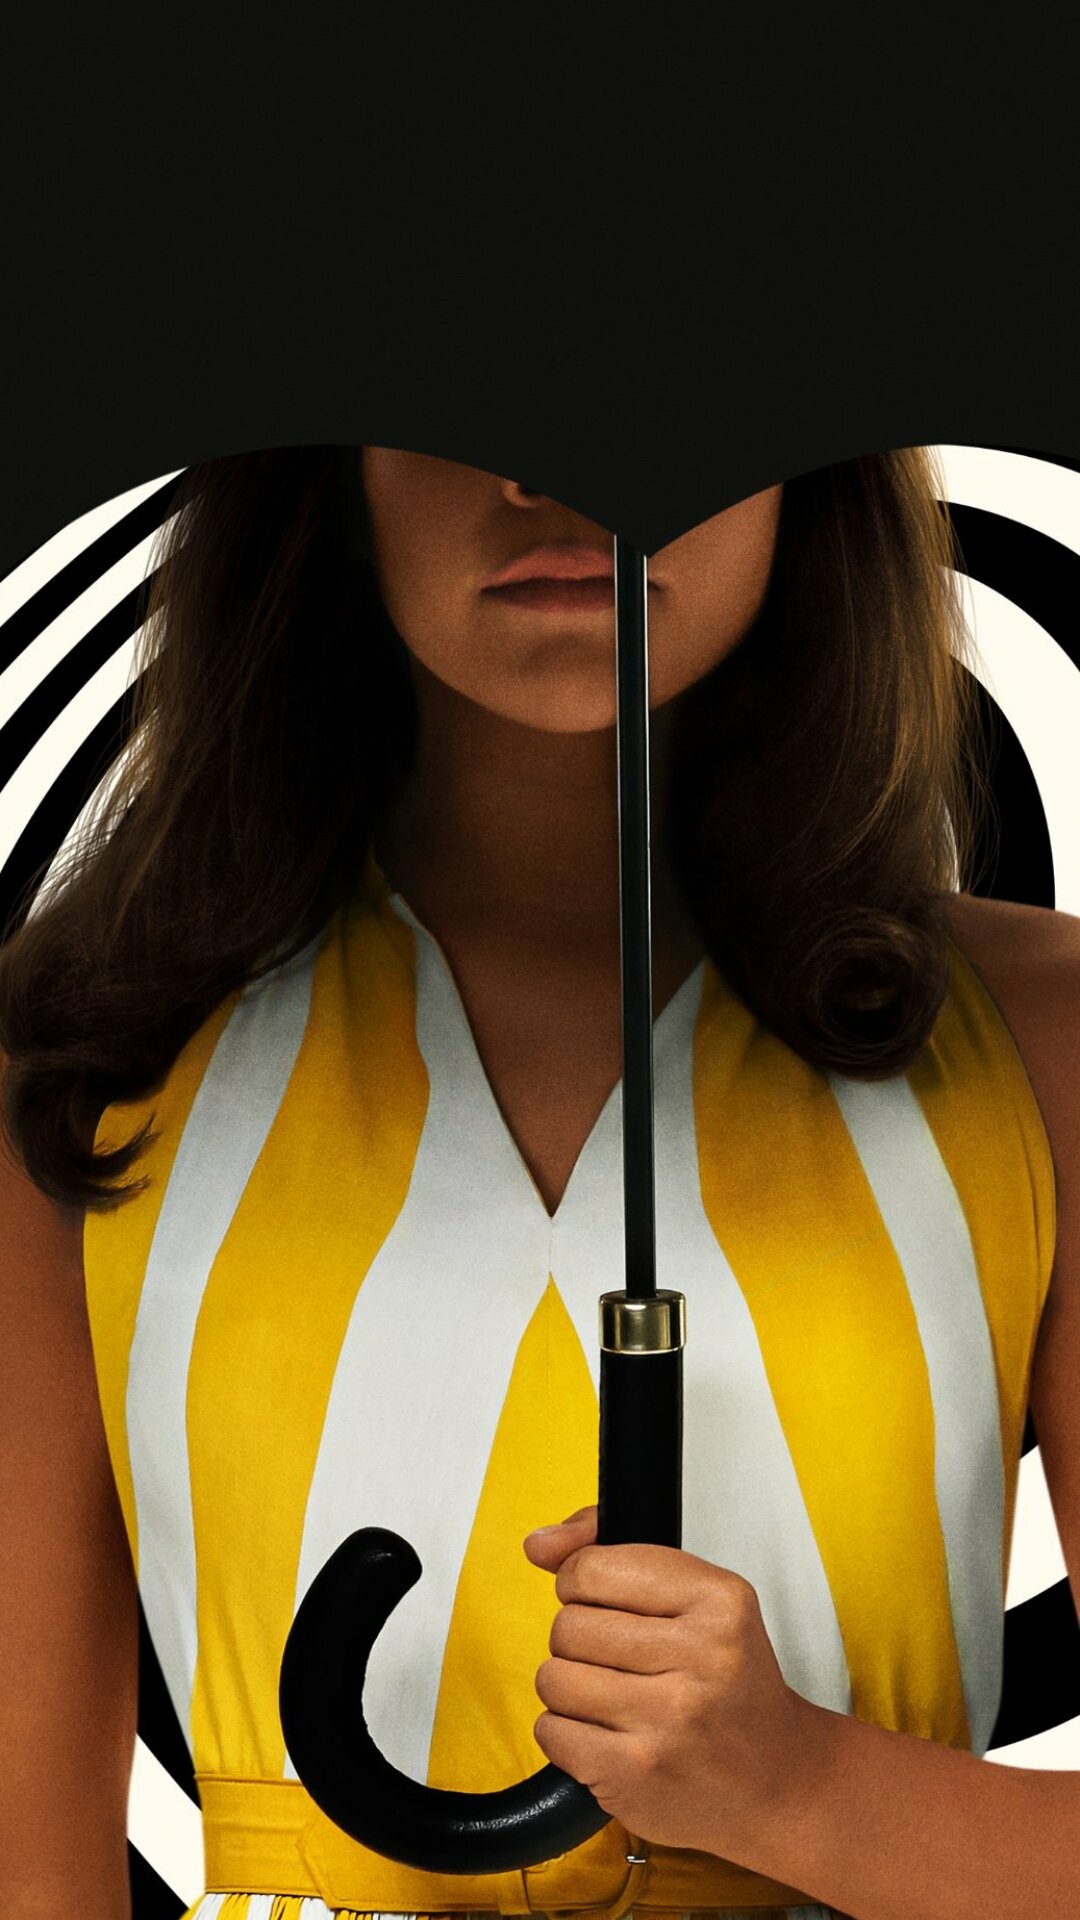 The Umbrella Academy: Allison Hargreeves, A celebrity actress with the ability to control minds. 1080x1920 Full HD Wallpaper.